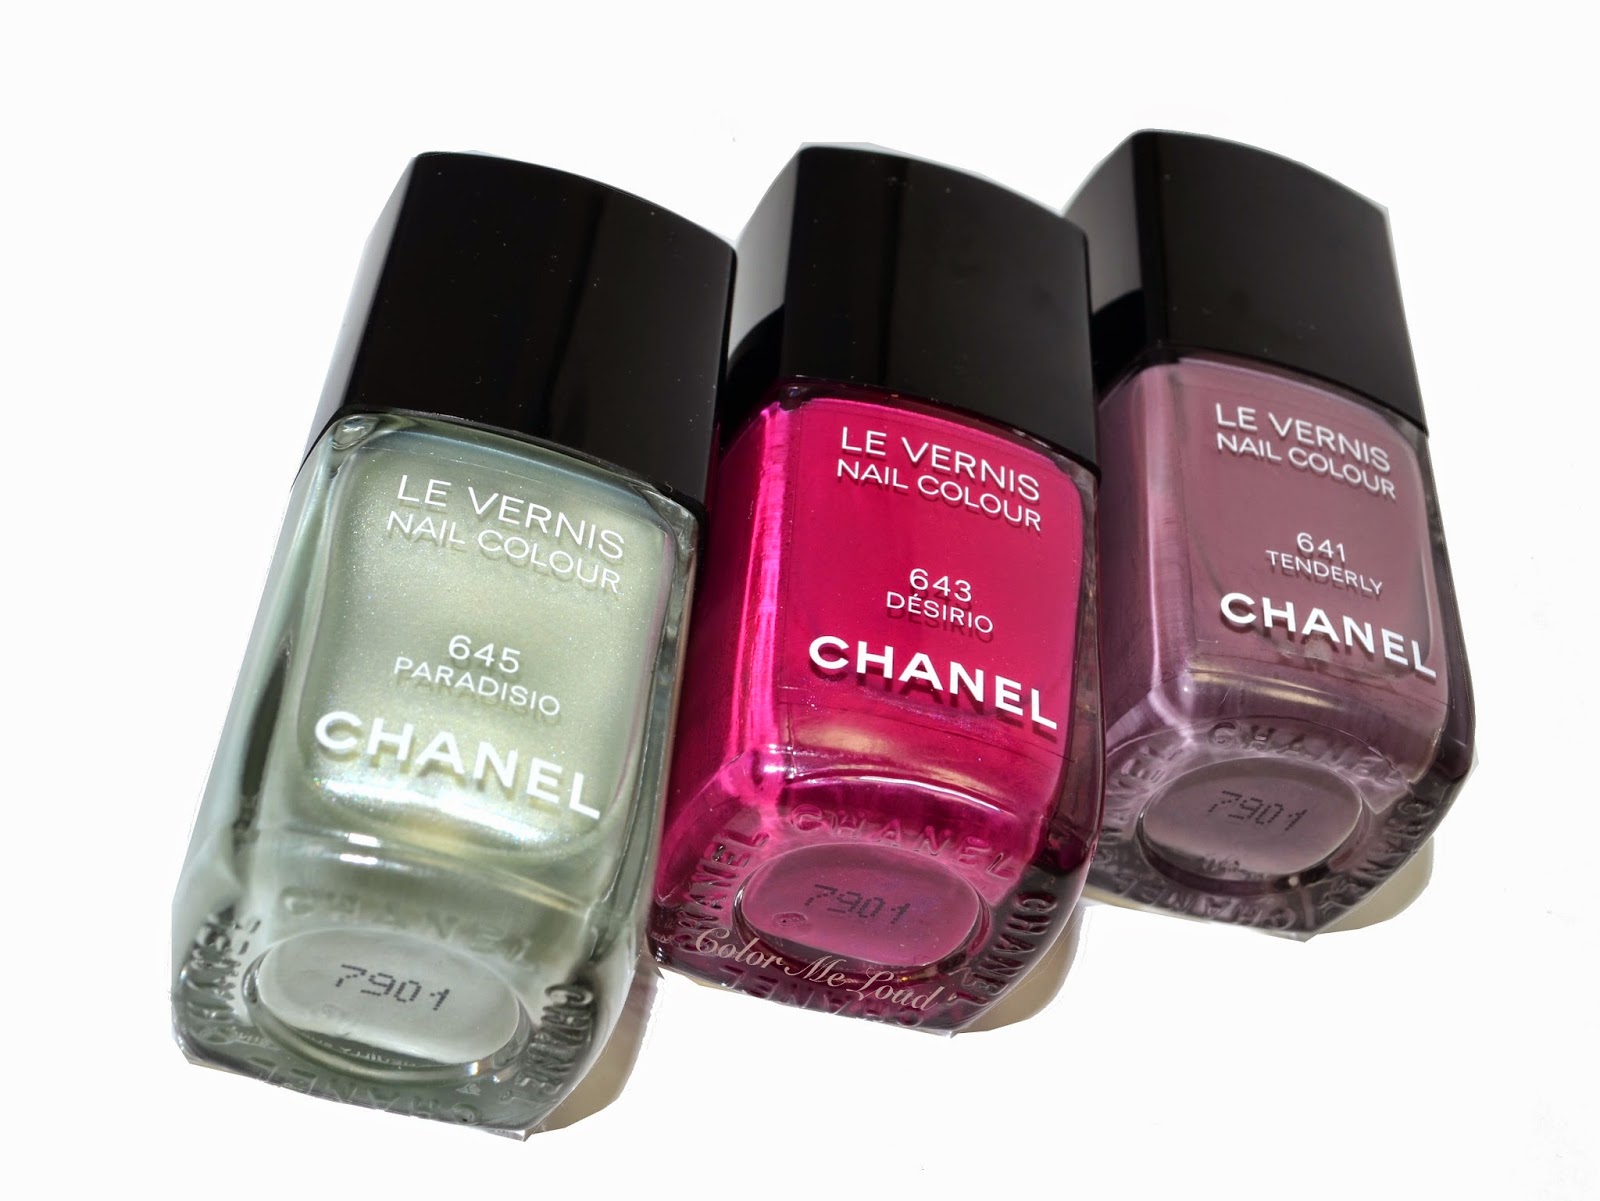 Chanel Le Vernis #641 Tenderly, #643 Desirio and #645 Paradisio for Rêverie  Parisienne Spring 2015 Collection, Swatch, Review & Comparison